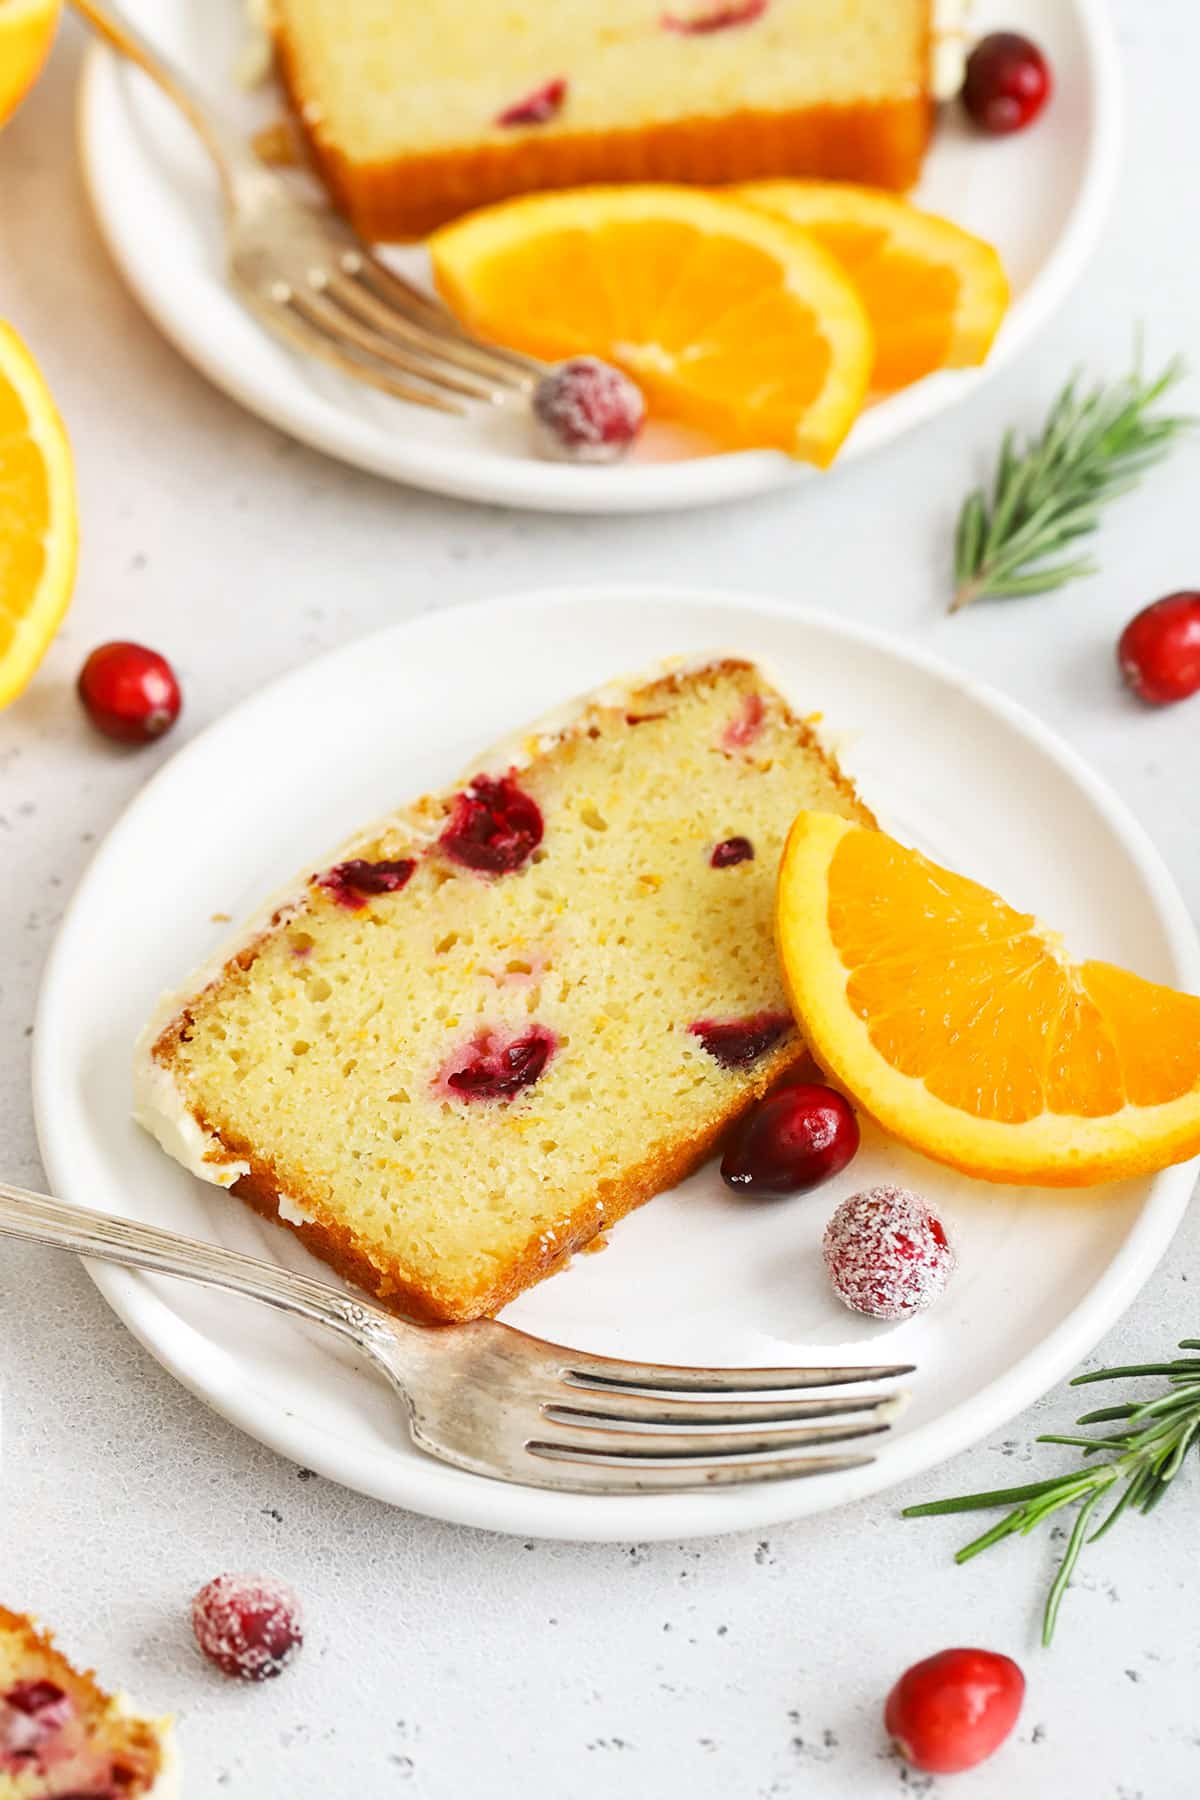 Front view of a slice of gluten-free orange cranberry loaf cake on a white plate with sugared cranberries